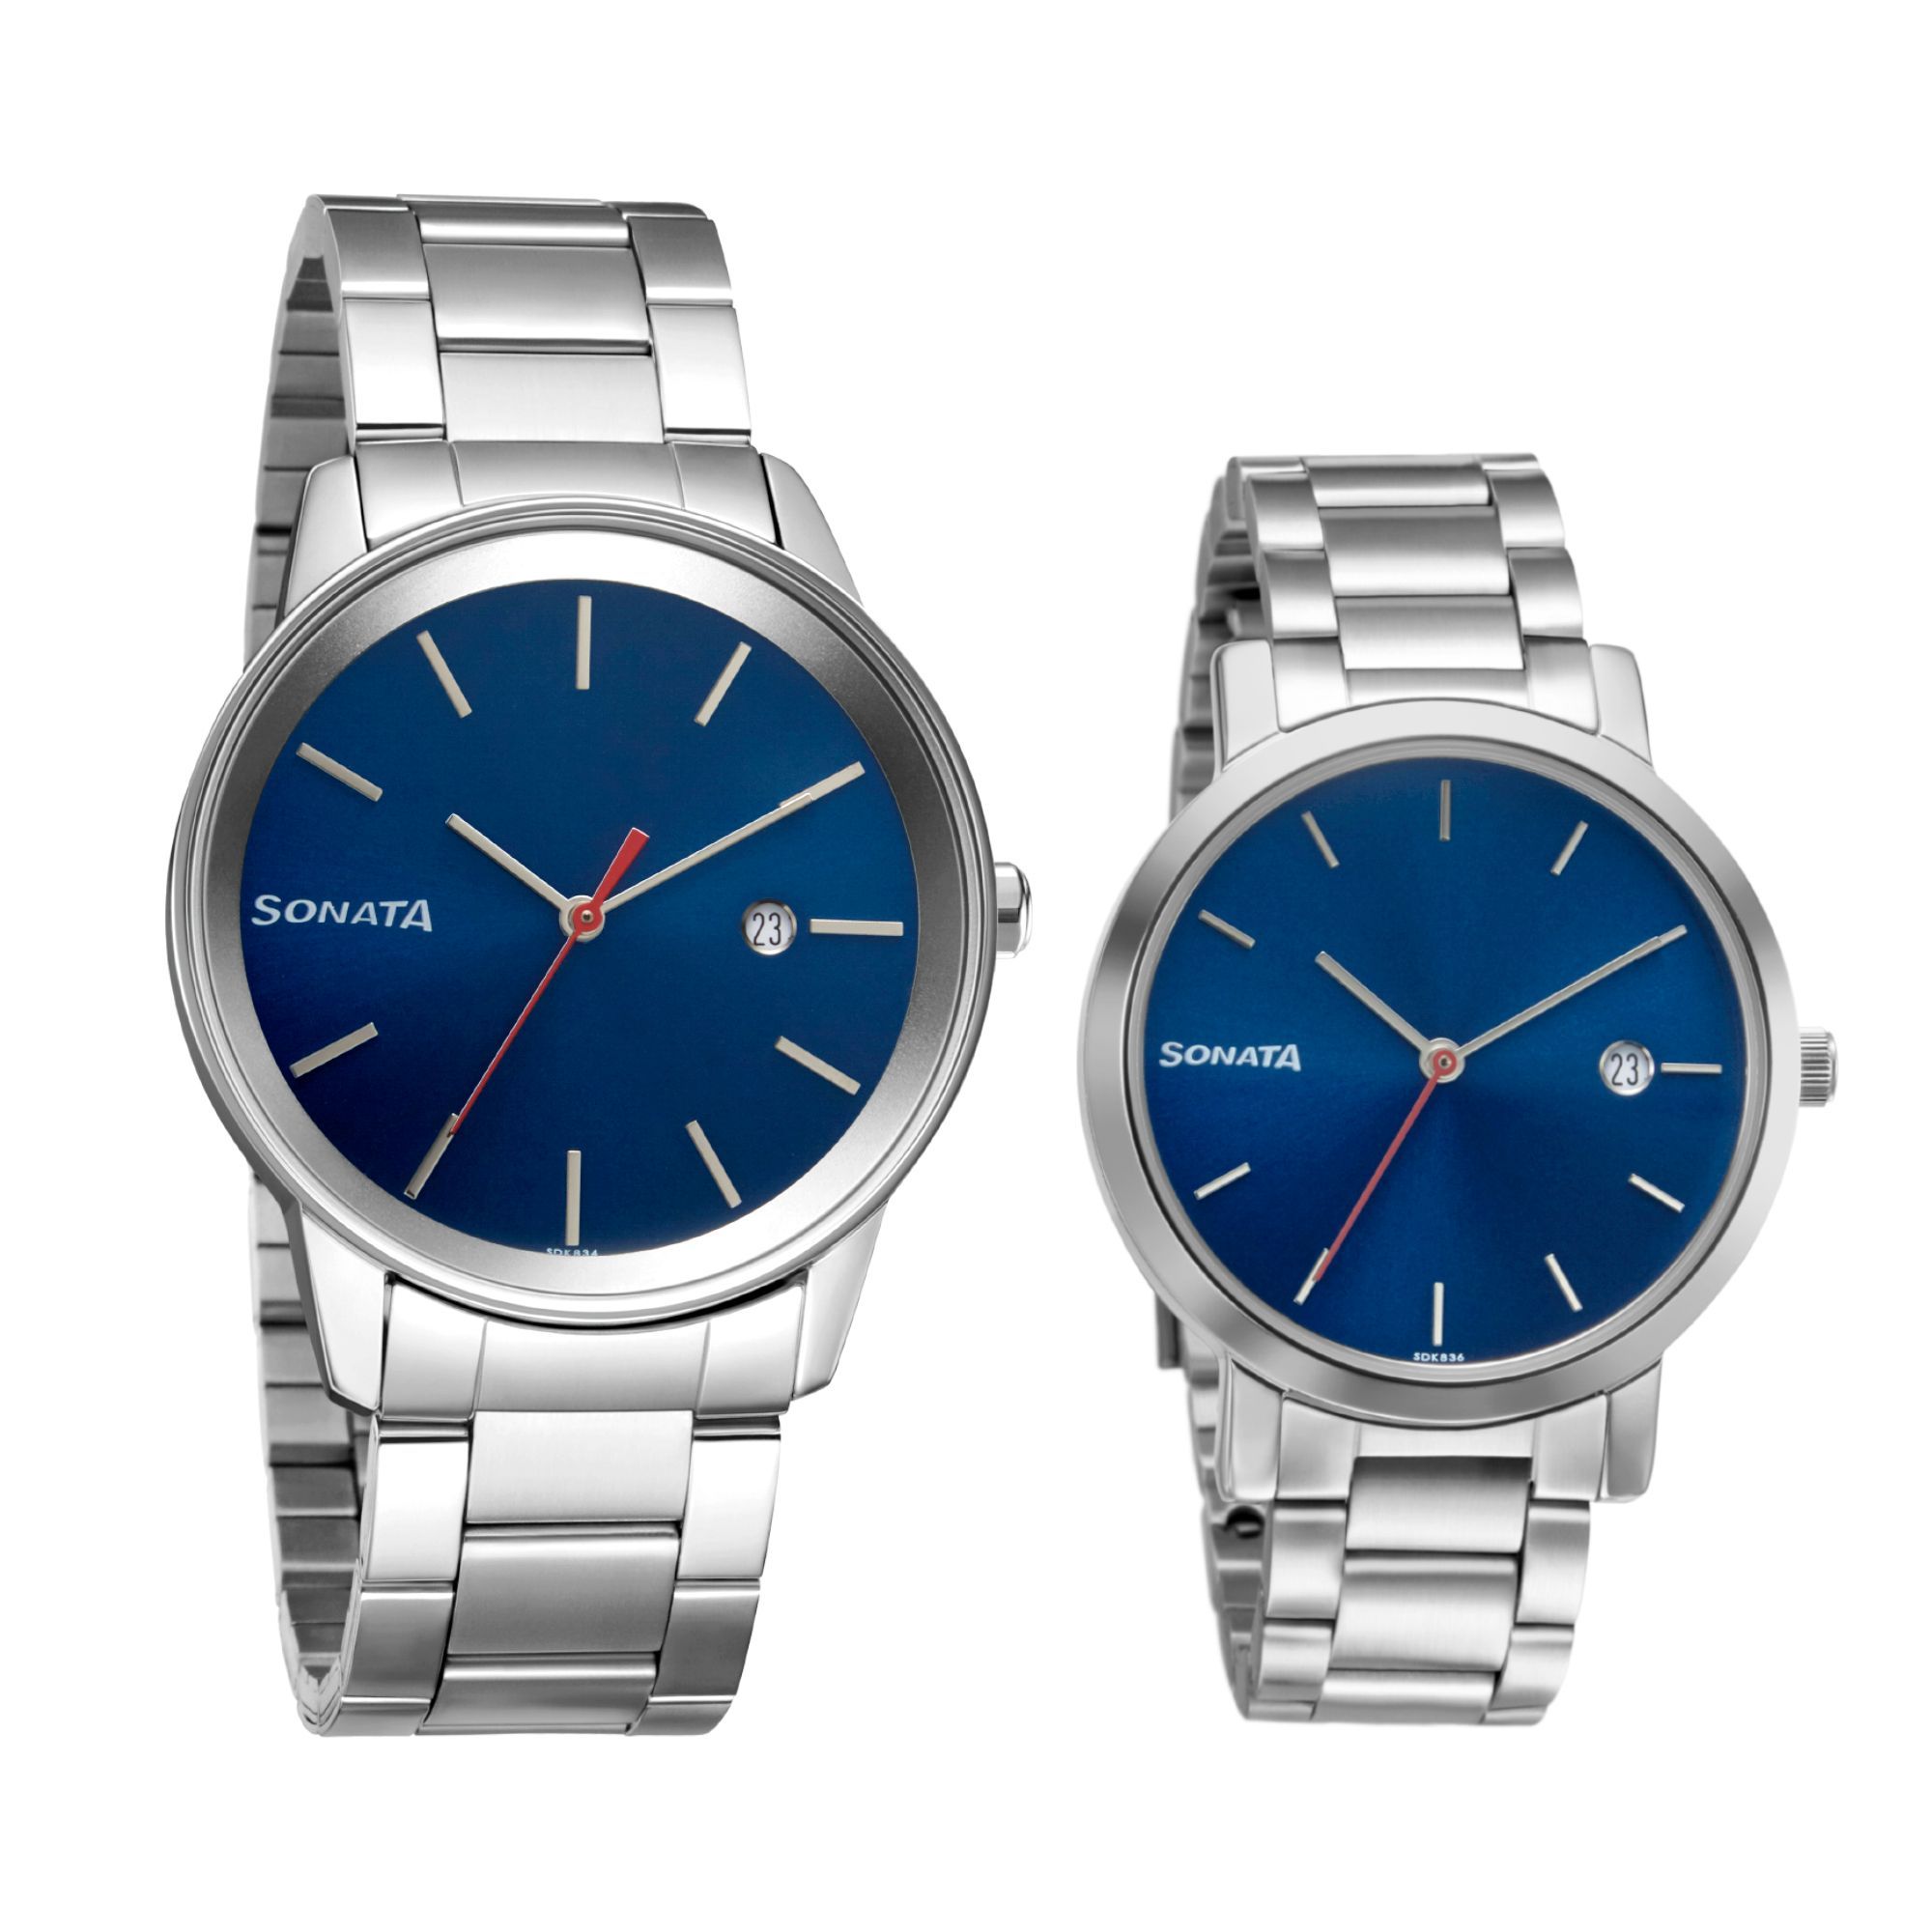 Sonata 71338164SM01 Blue Dial Analog Watch For Couple